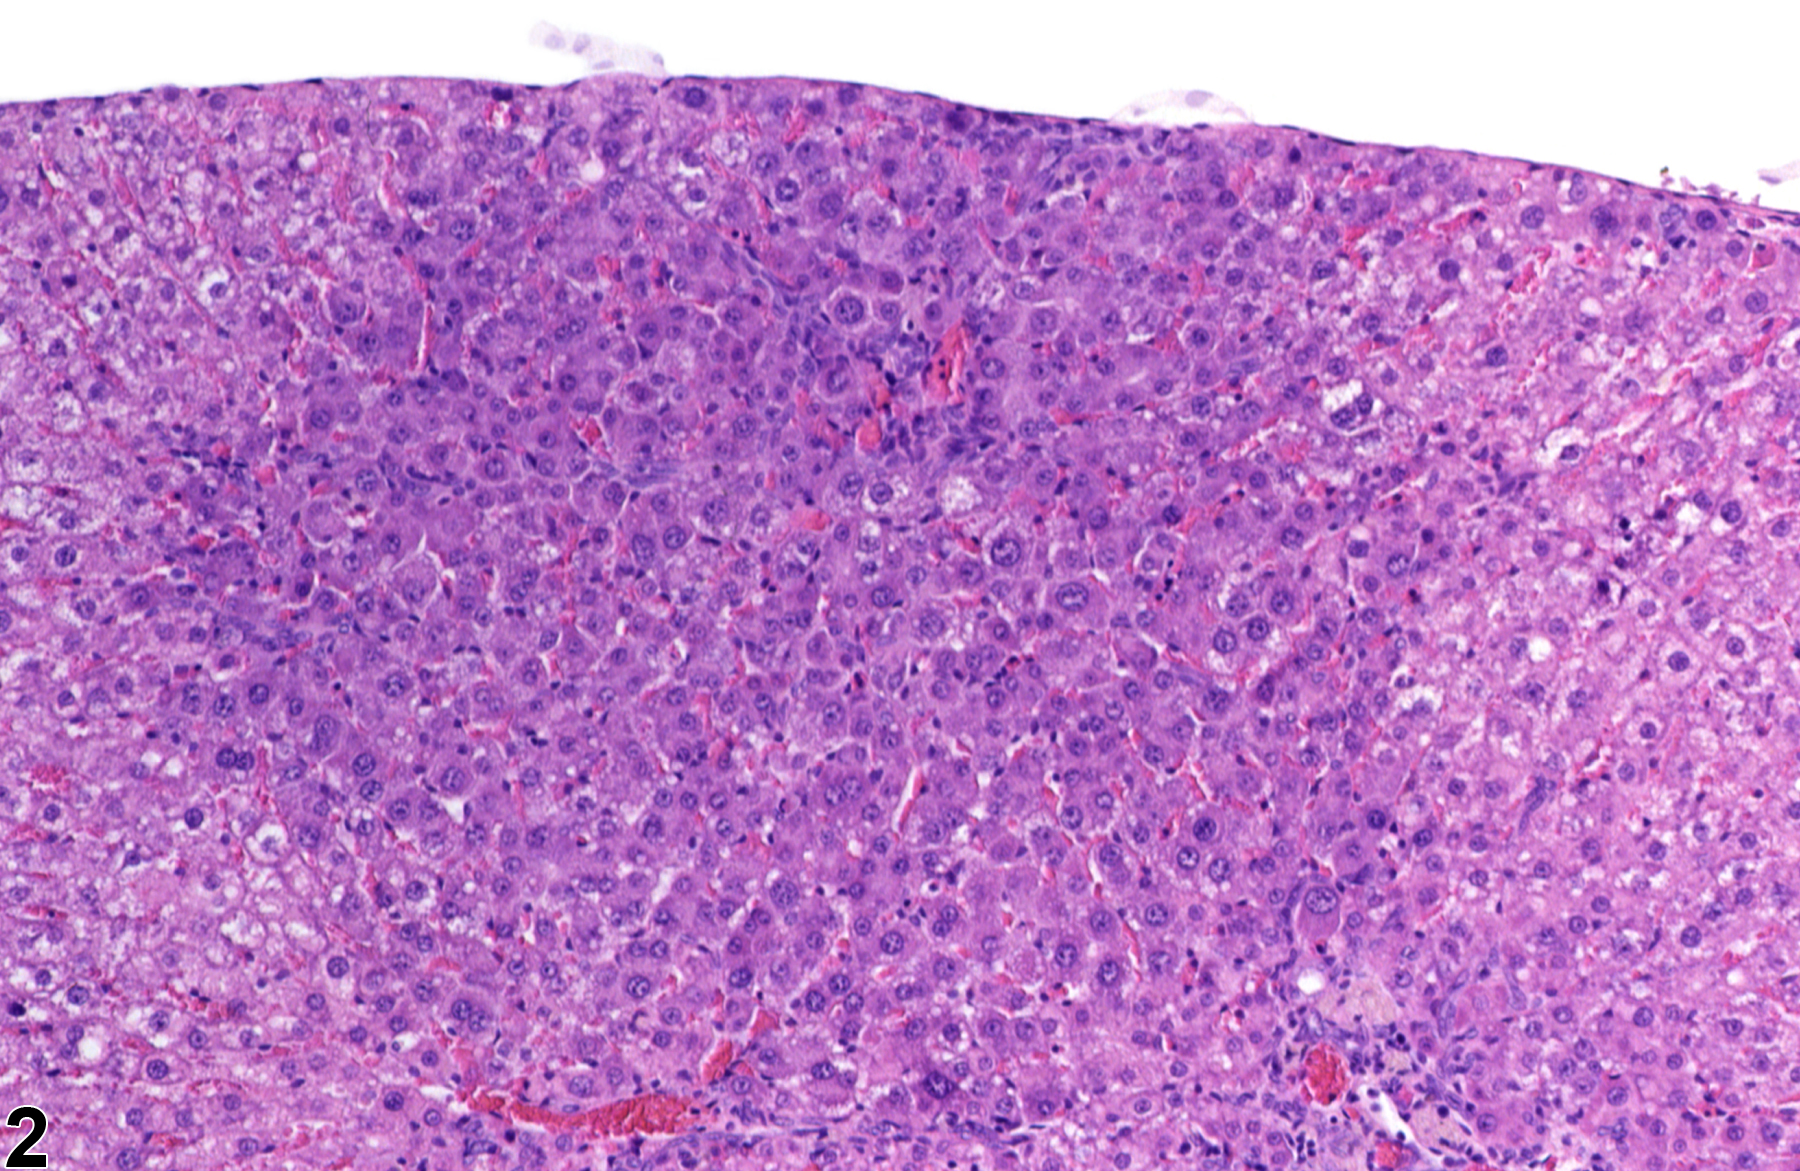 Image of basophilic focus in the liver from a male  F344/N rat in a subchronic study